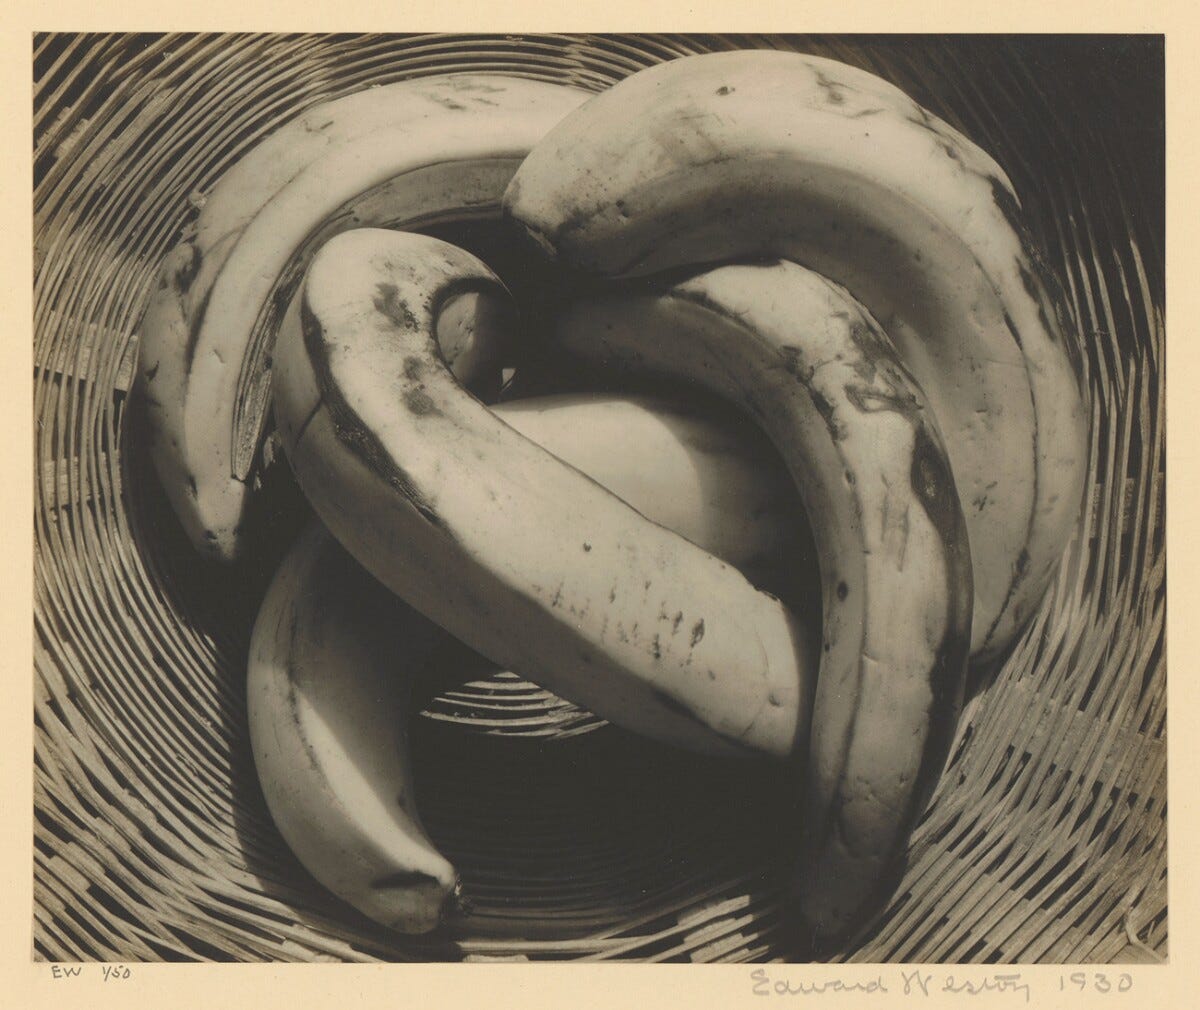 Bananas, Edward Westin. A print of several bananas arranged in a basket, taken from above.